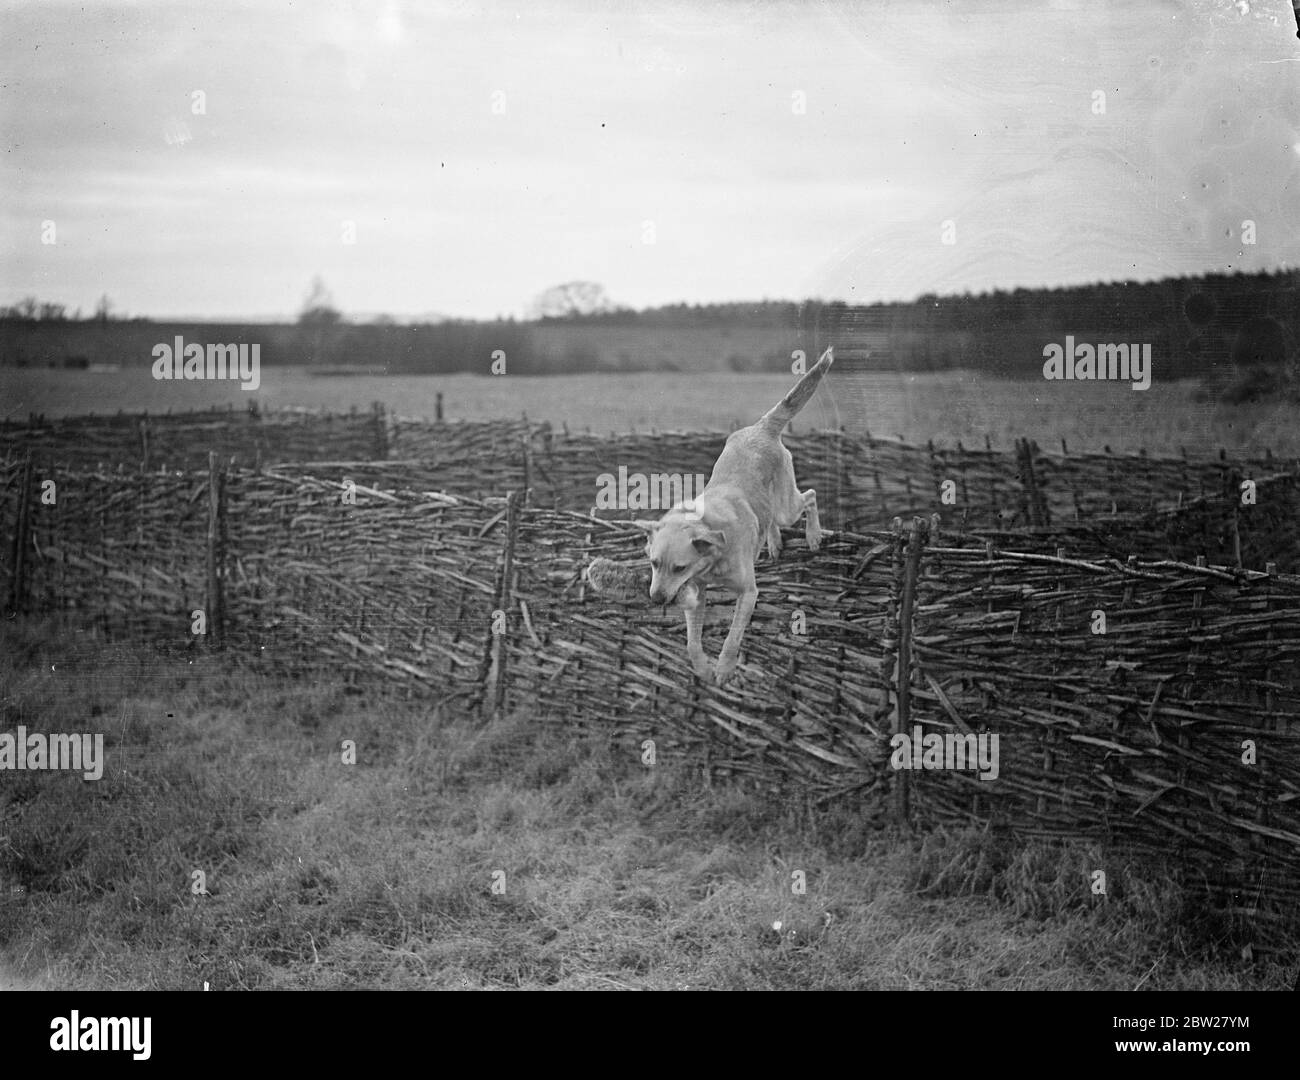 Thirty dogs , some of them mongrels, which will eventually accompany London and provincial policeman on lonely beats, are being trained under a Home Office experiment for police duties, at Washwater, near Newbury, Berkshire. The animals are taught to stay on guard, while a policeman searches a house, intercept anyone coming out, and even to search a house while the officer remained outside. Should the man need help, the dogs are taught to carry messages. Bloodhounds, some imported from America, are trained to follow a scent, even when it is hours old. Photo shows 'Mouse' a crossbred stray dog, Stock Photo